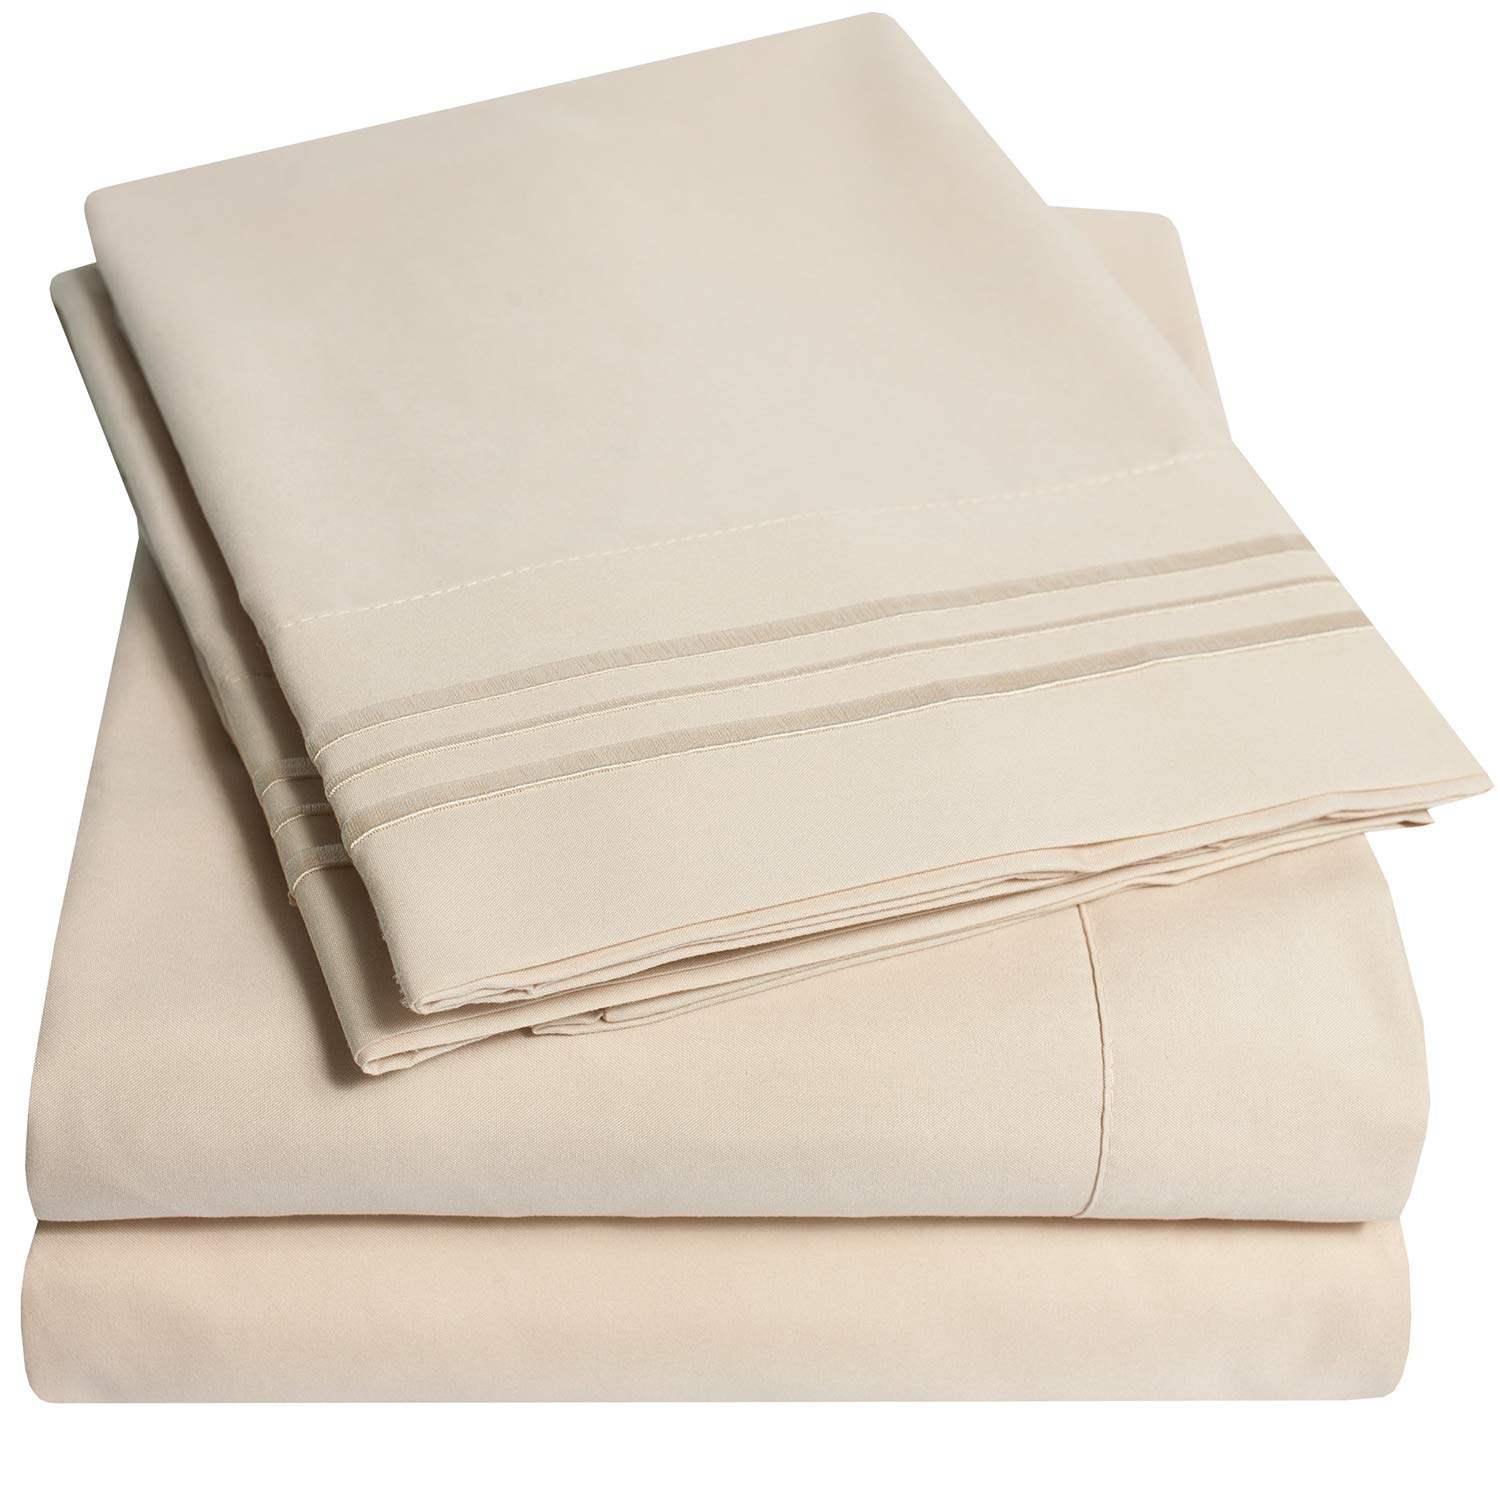 Book Cover 1500 Supreme Collection King Sheet Sets Beige Cream - Luxury Hotel Bed Sheets and Pillowcase Set for King Mattress - Extra Soft, Elastic Corner Straps, Deep Pocket Sheets, King Beige Cream